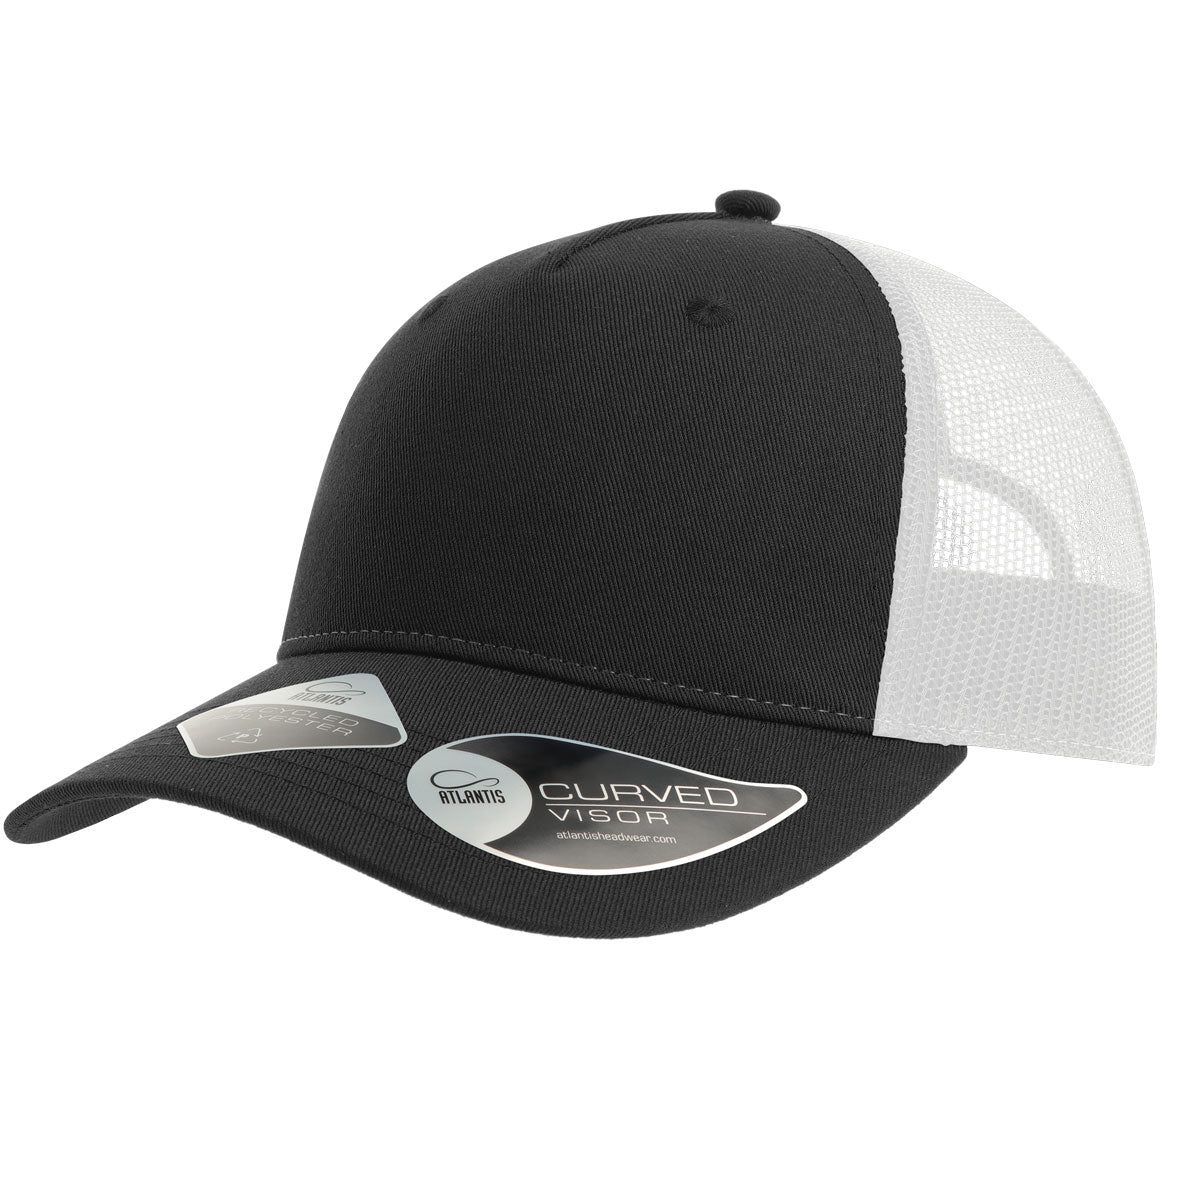 Customizable recycled polyester Atlantis truck hat in black and white.